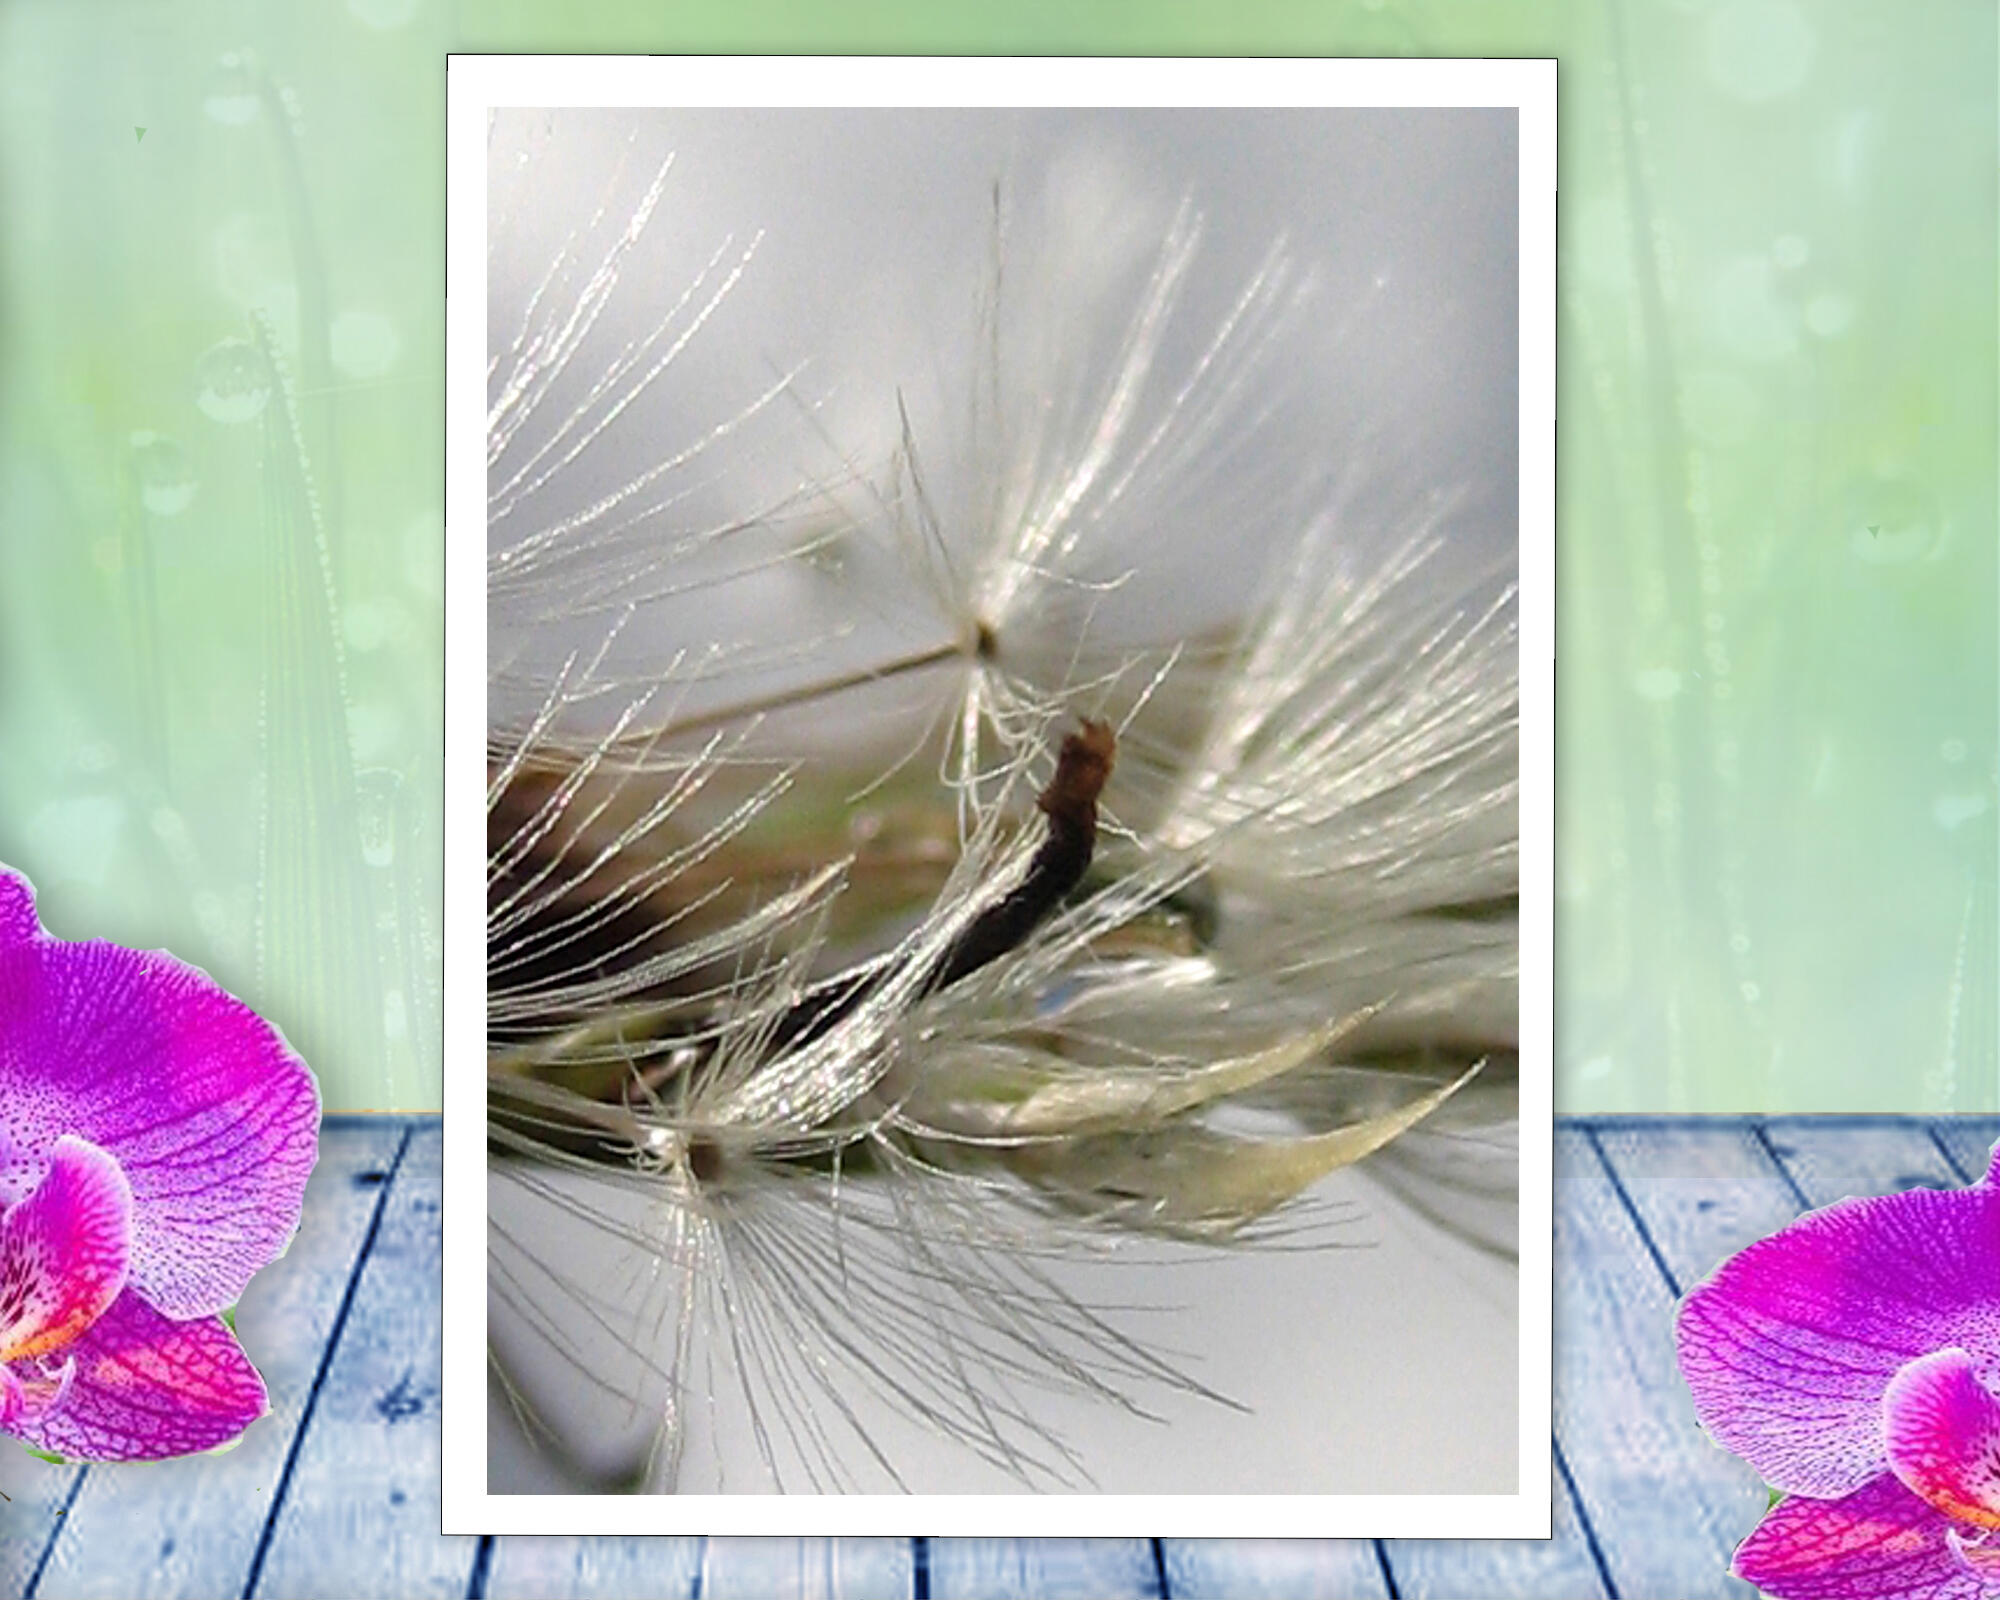 a silver dandelion poof shimmers in the sun, soft sensual nature photo with poem - Soft by The Poetry of Nature